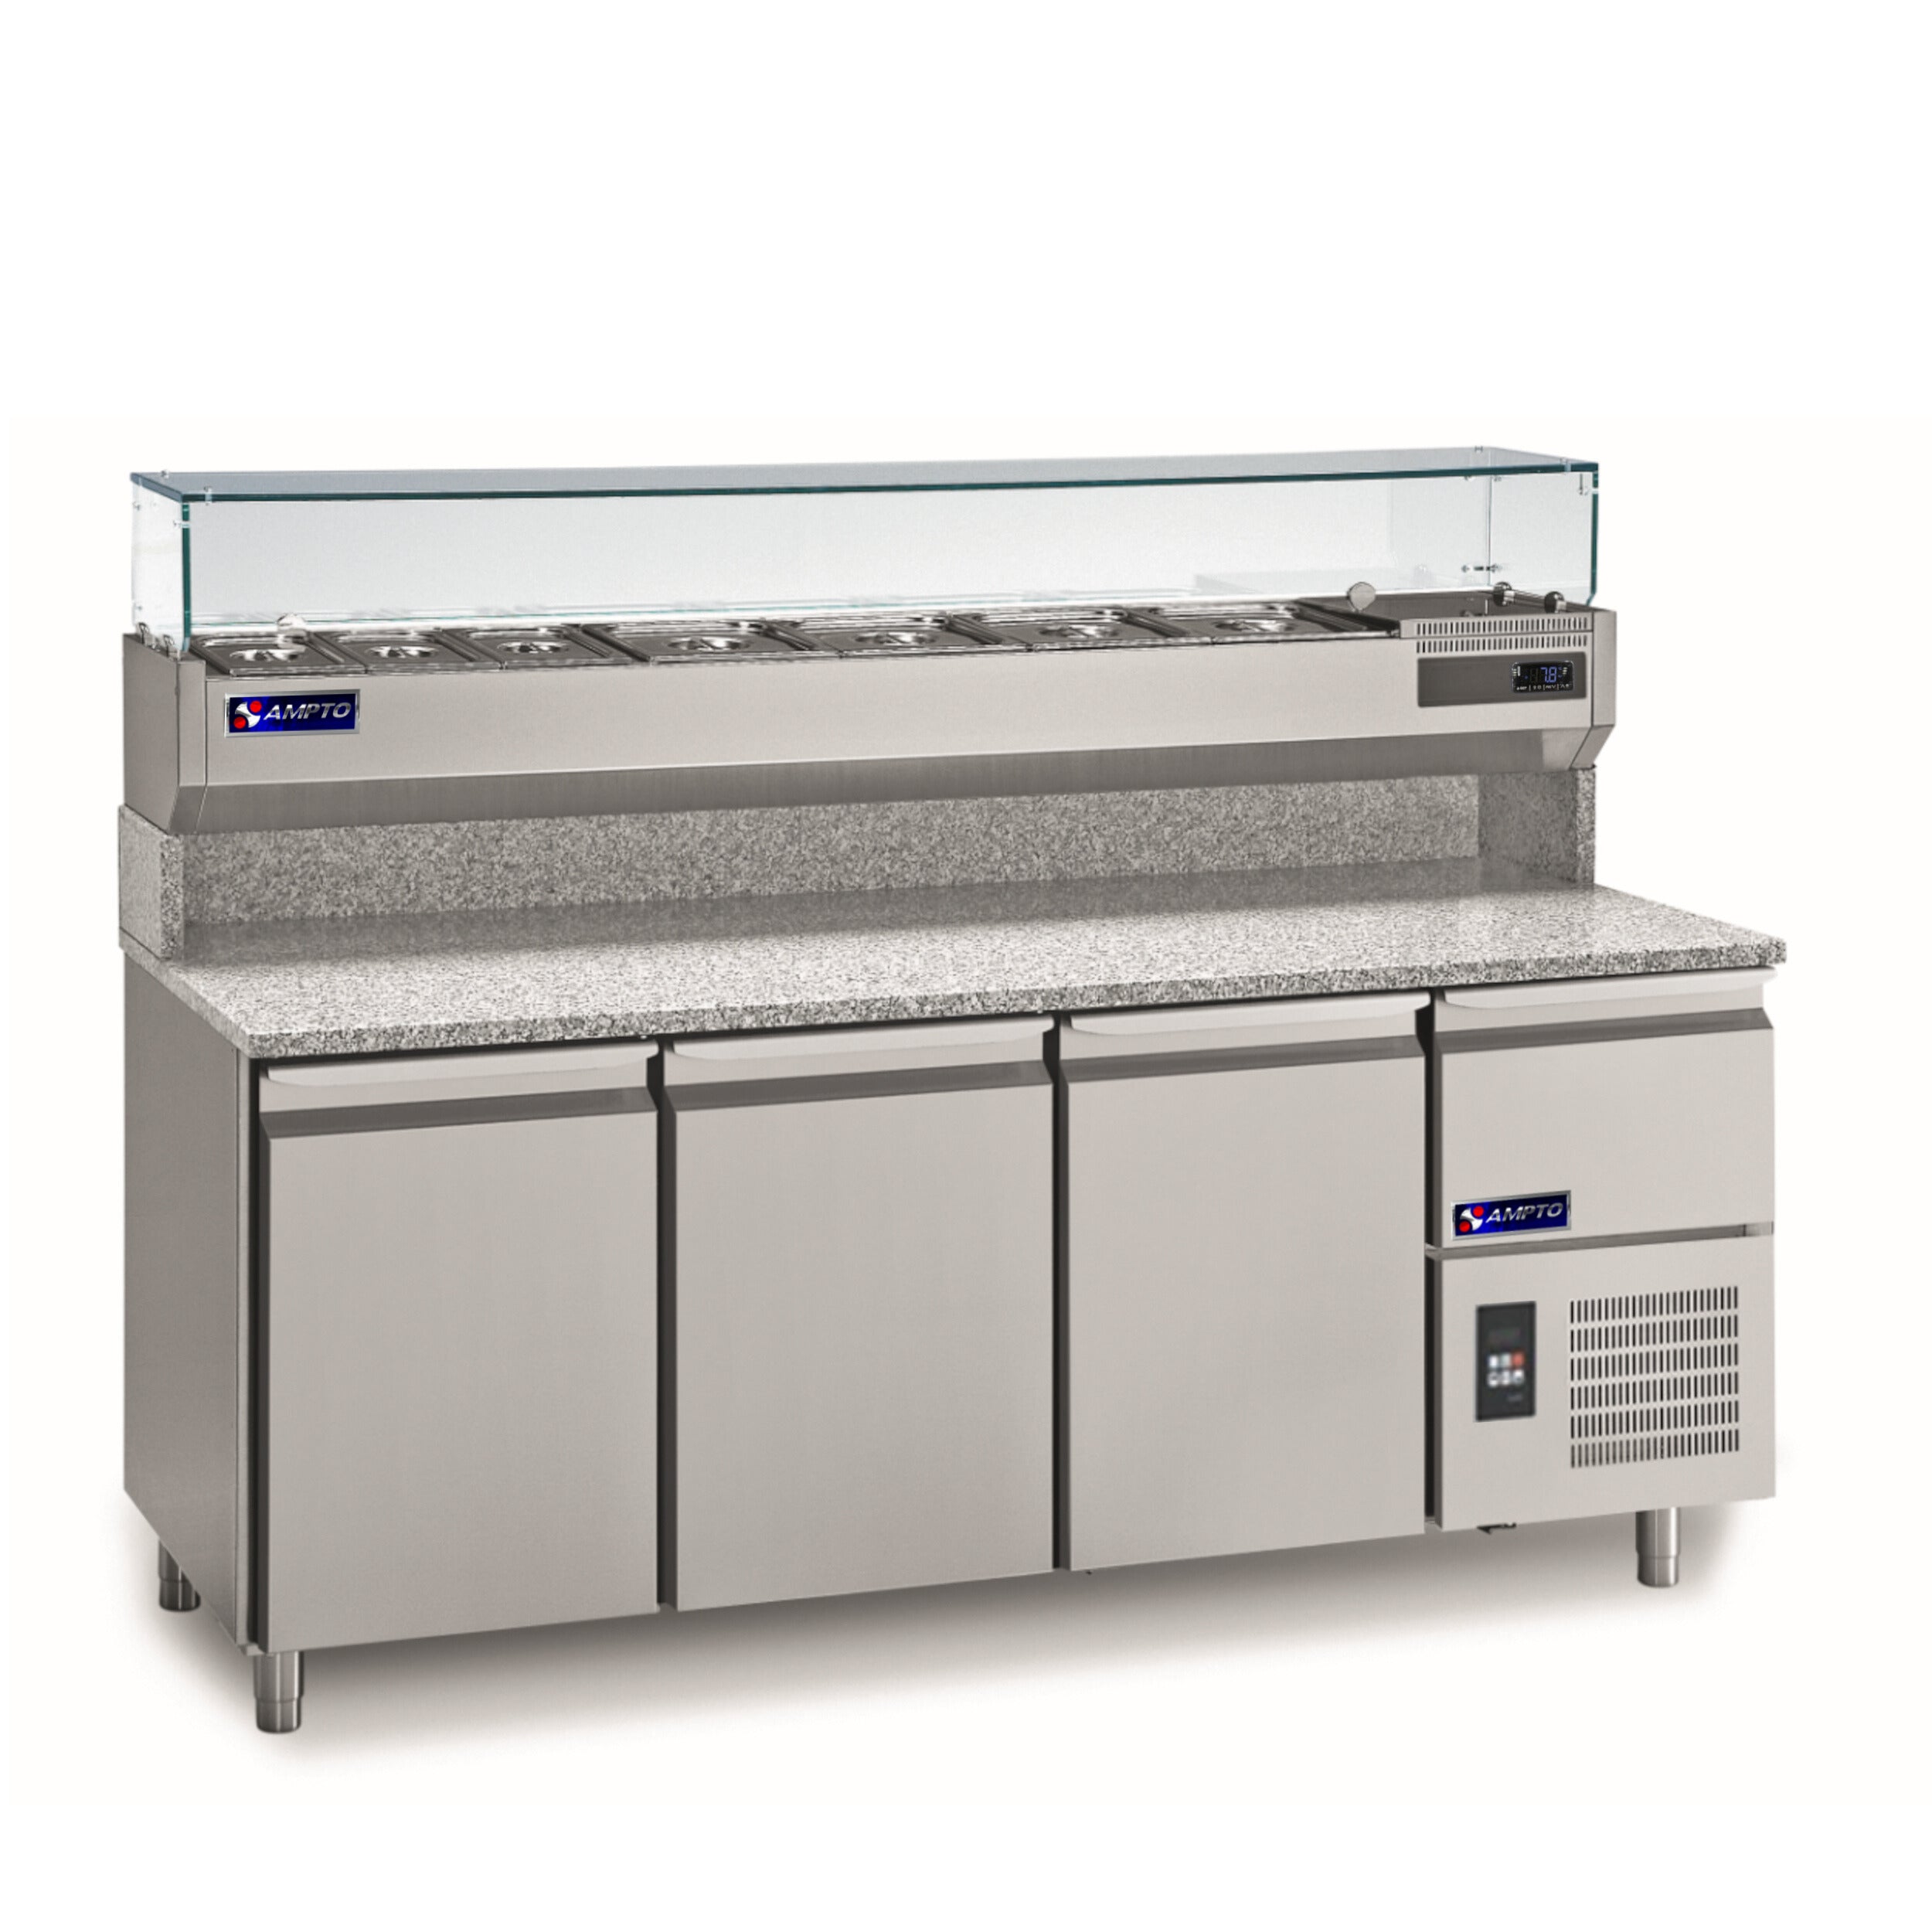 MPP-3US - Pizza Prep Table Refrigerated Granite 3 section with top rail